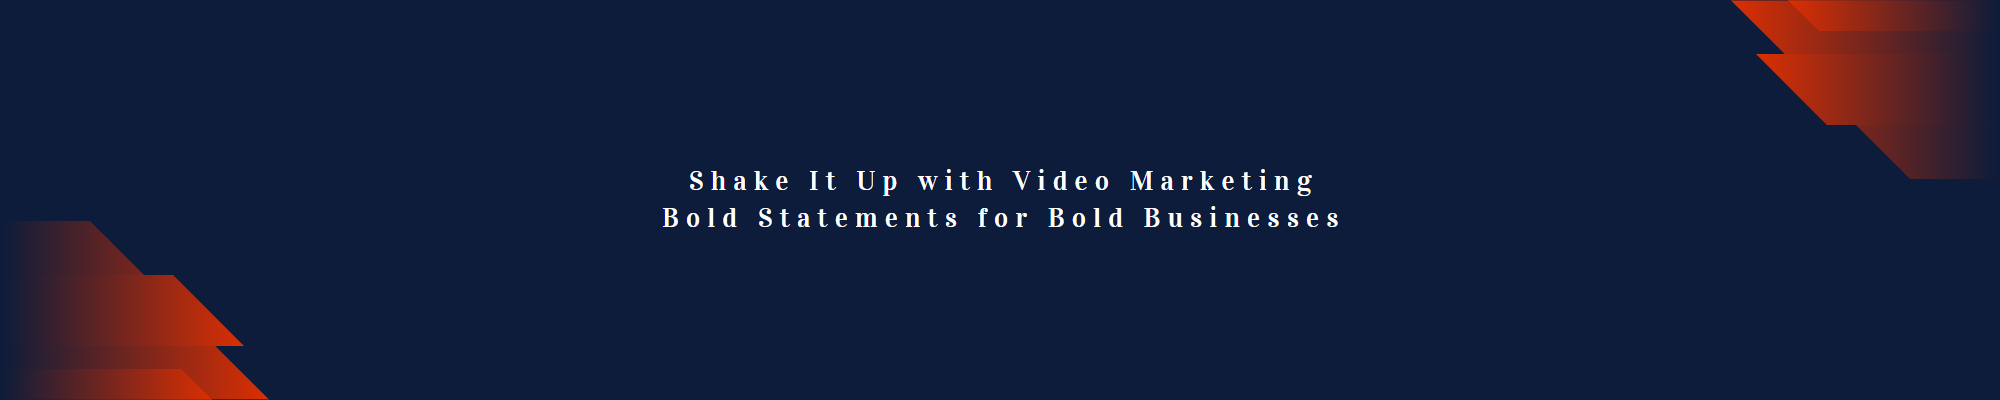 Video Marketing - Shake it up - Start your videos with a bold statement to grab attention